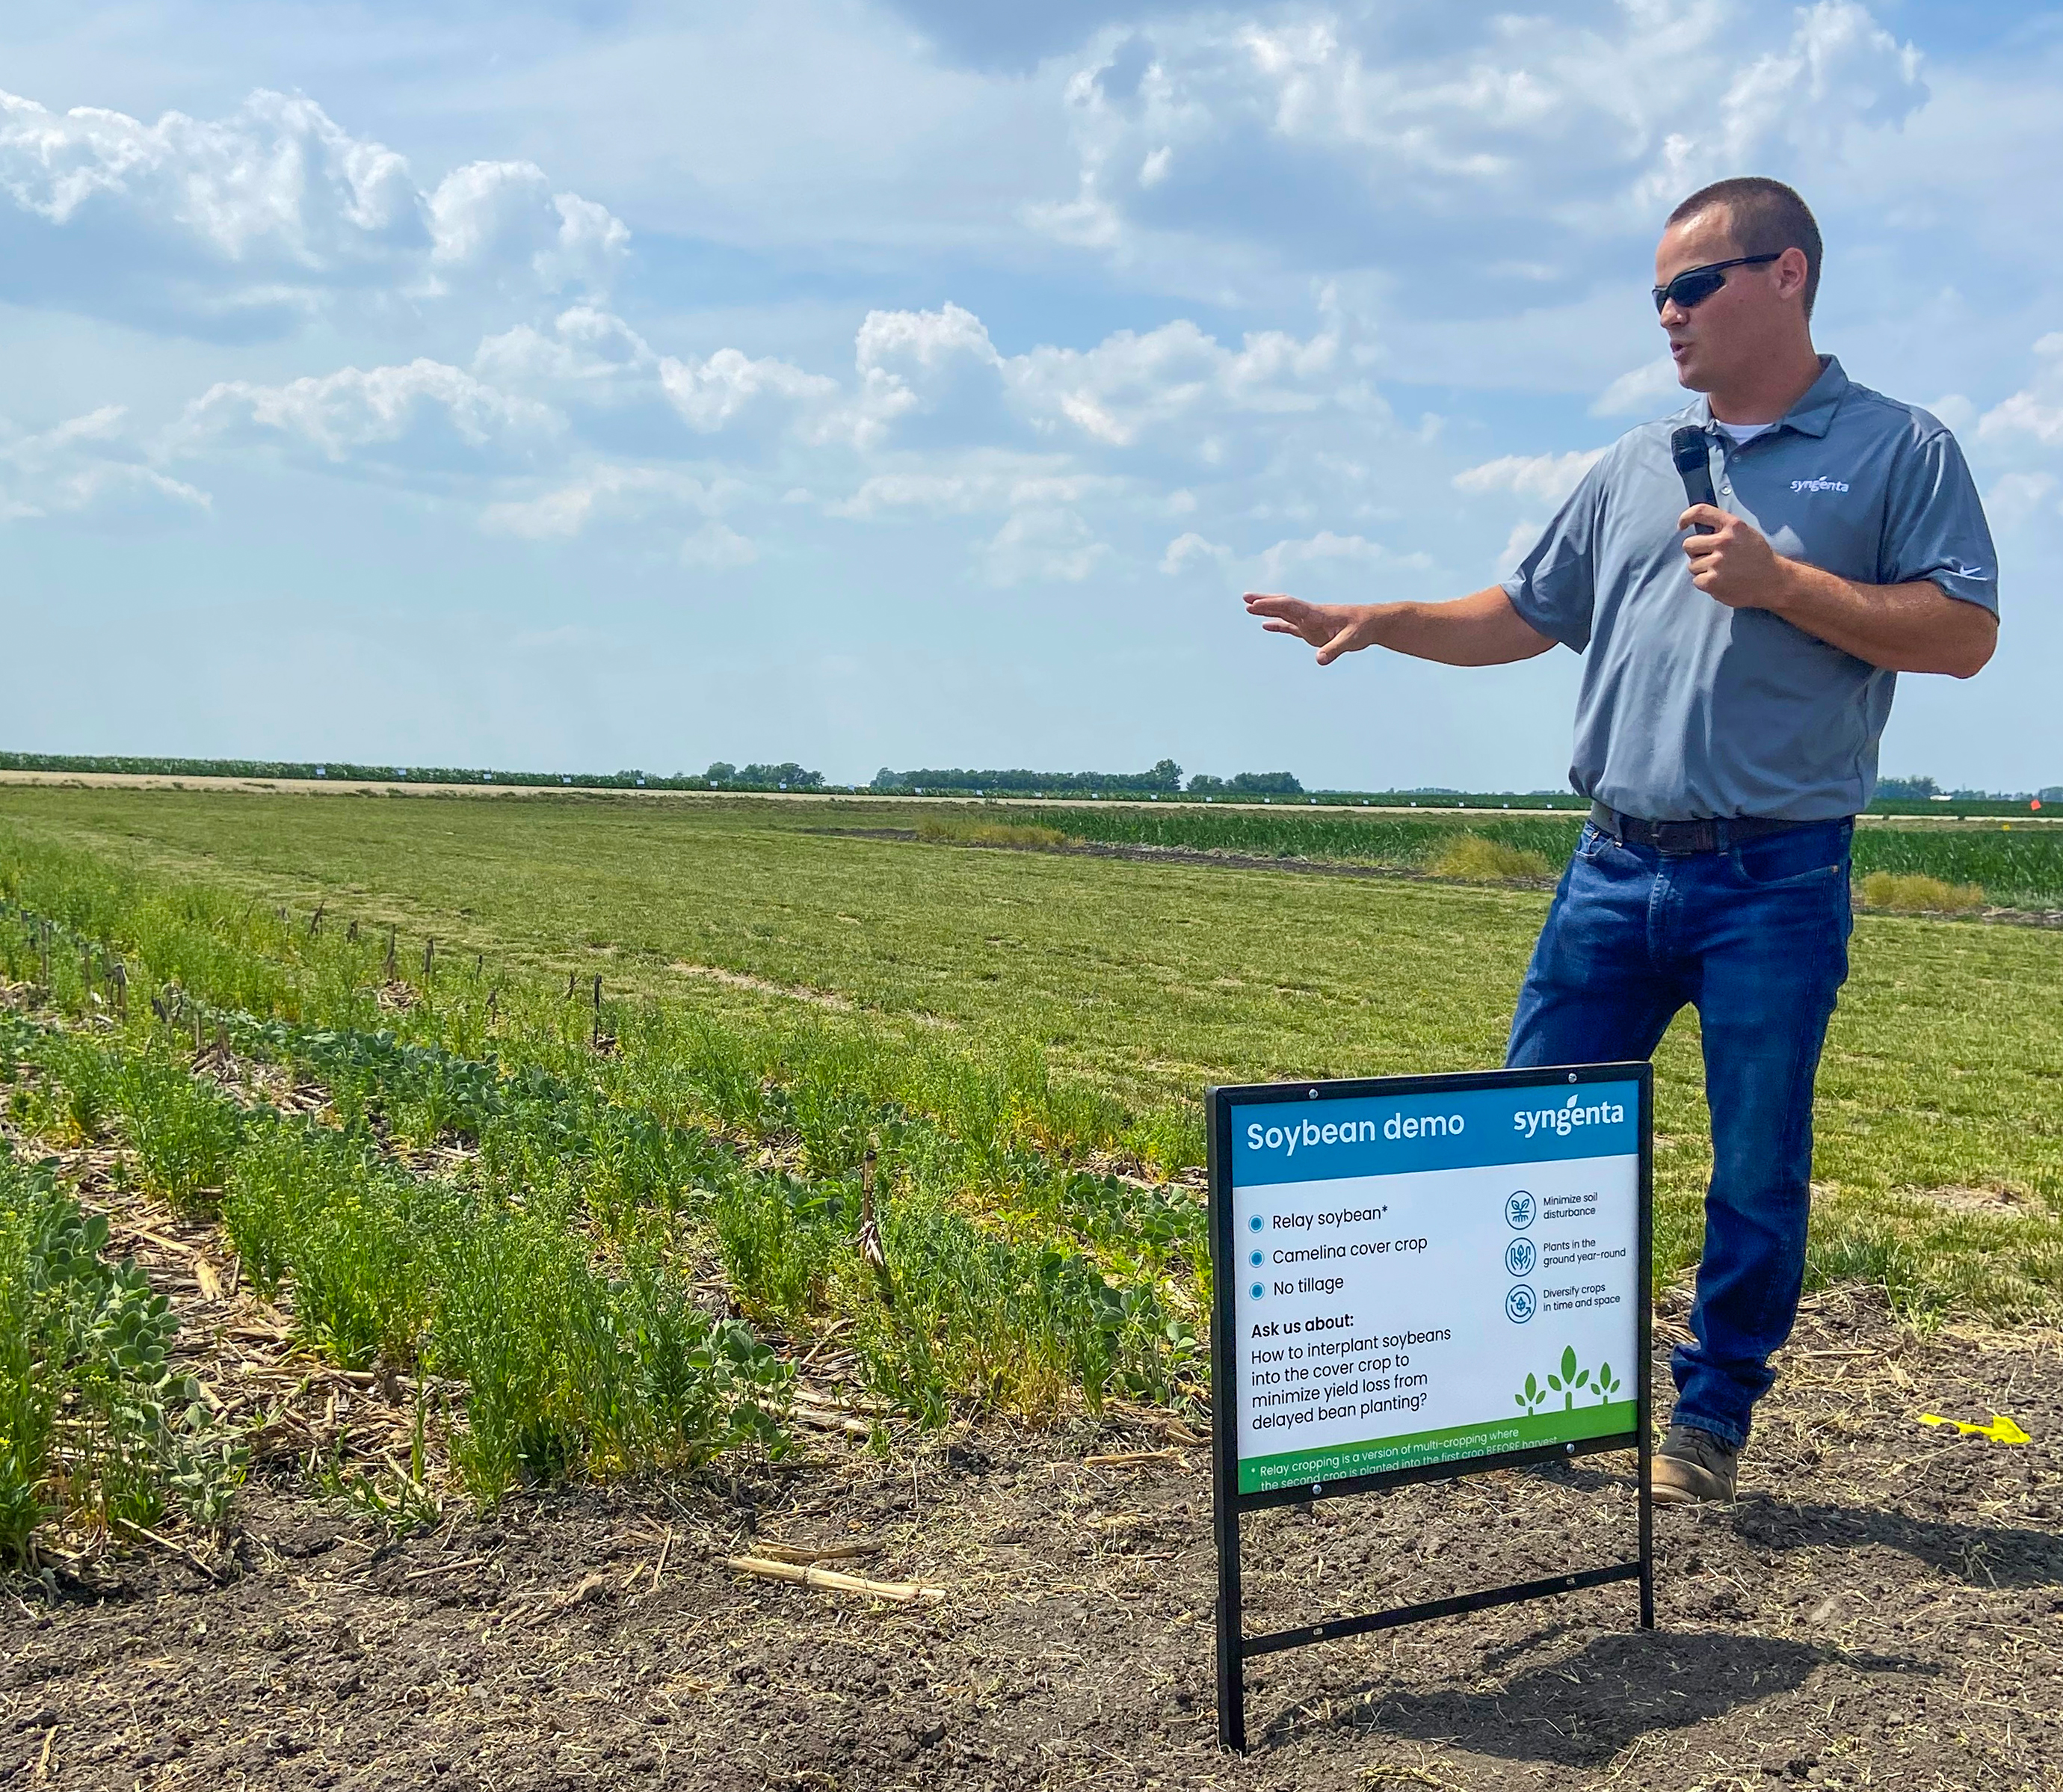 Camelina gets a boost helping farmers who want to use the oilseed to support their regenerative ag practices.